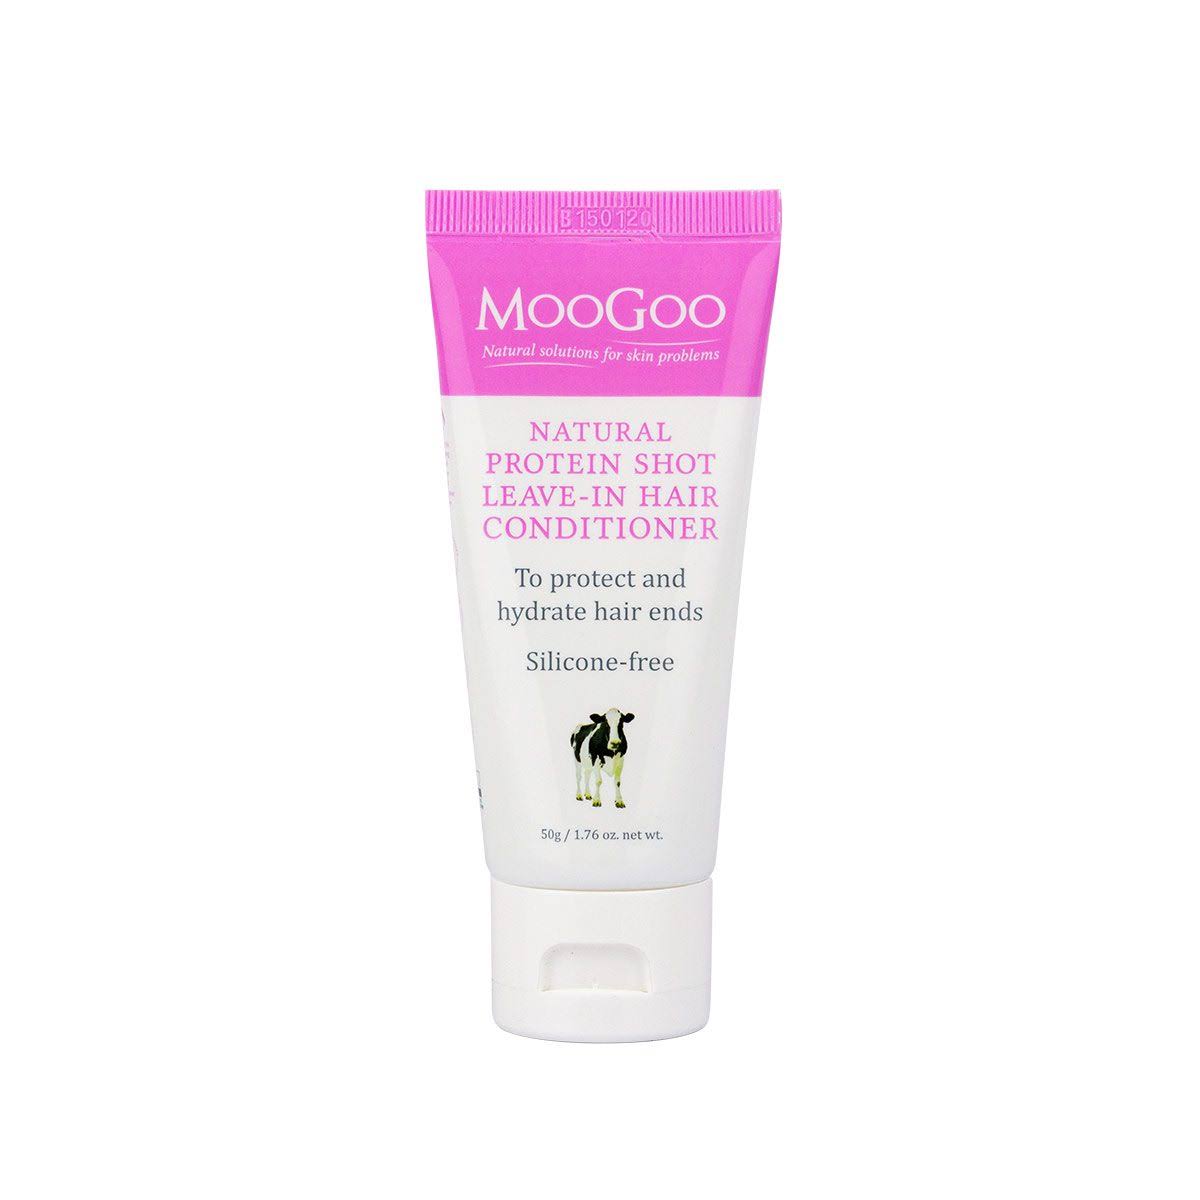 MooGoo Protein Shot Leave in Conditioner, 50g